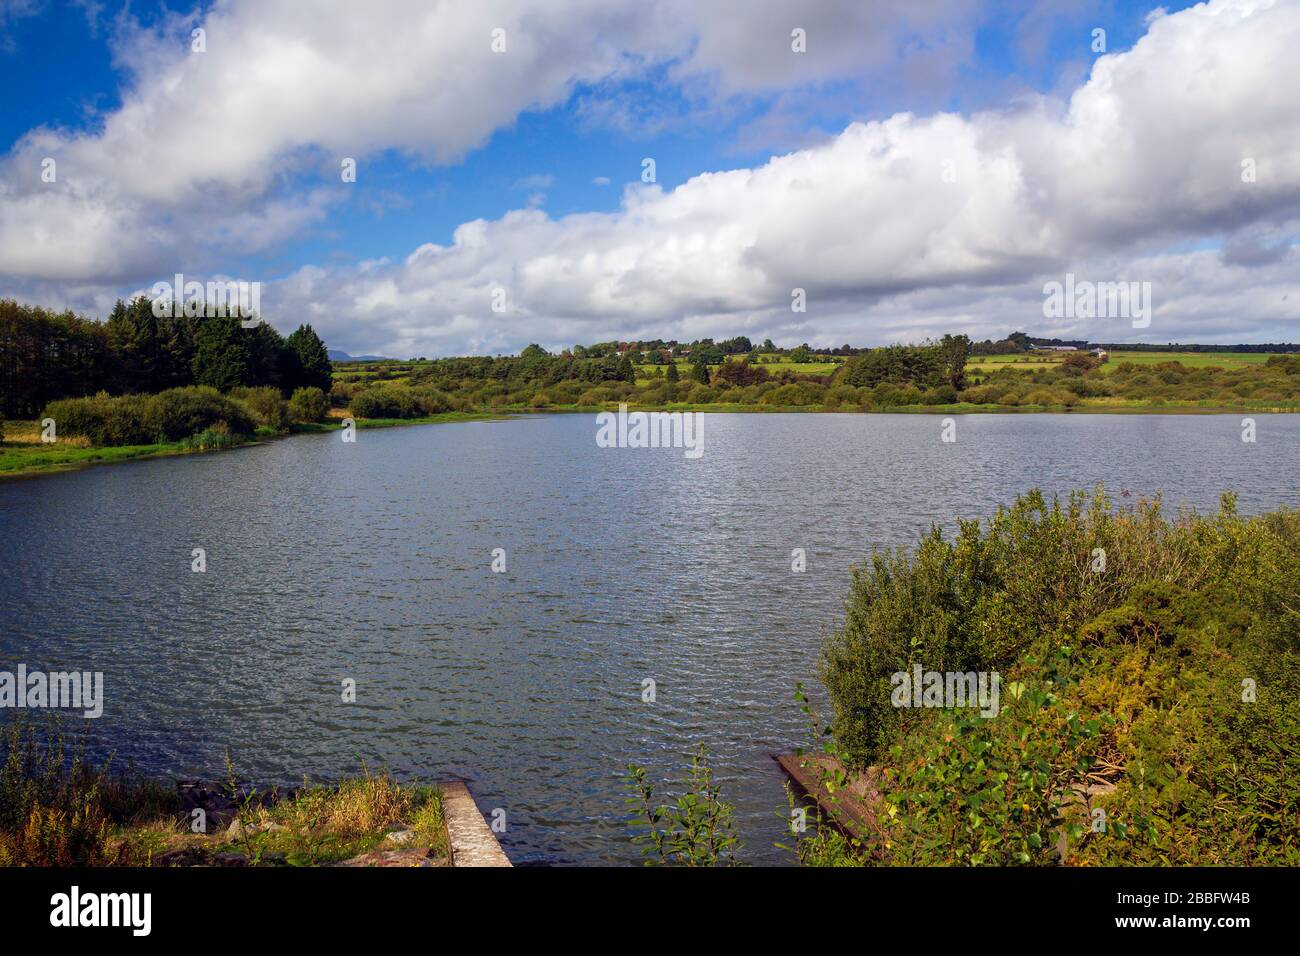 Picturesquely located water reservoir nestled among the hills. Stock Photo